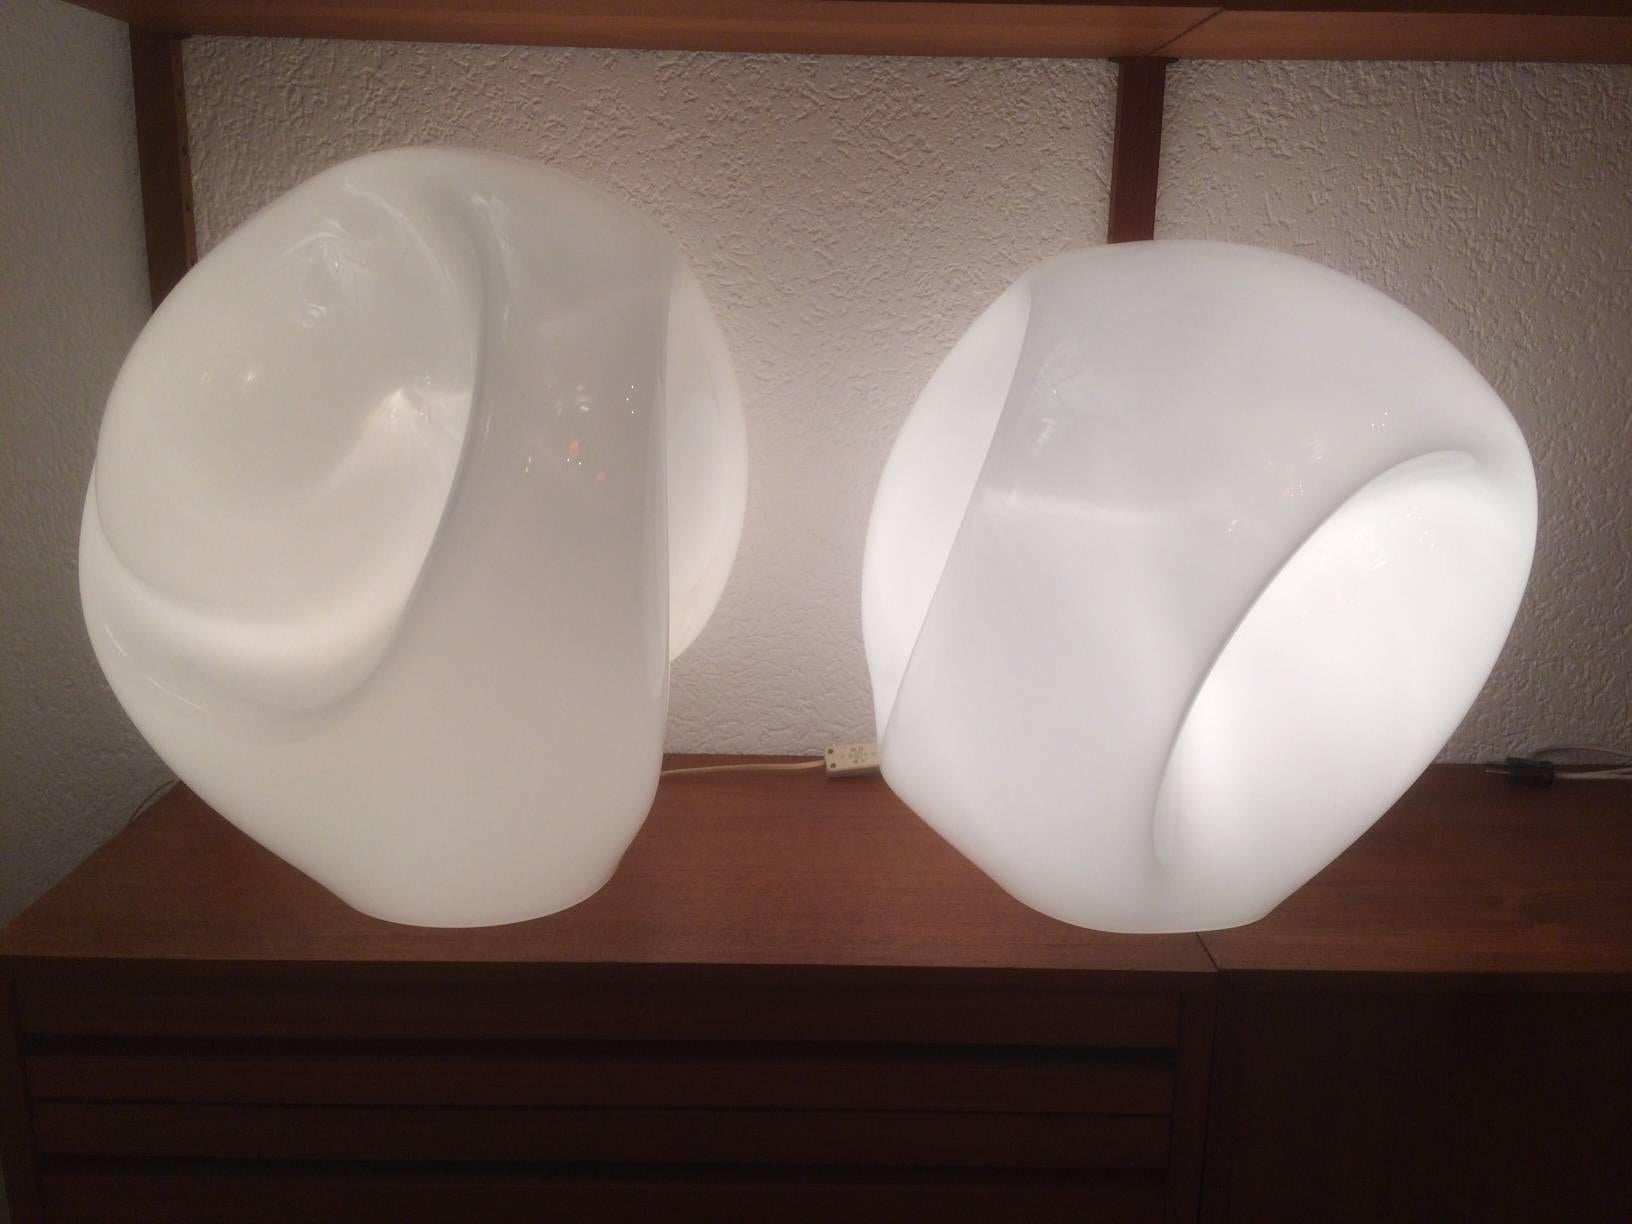 Pair of "Munega" glass table lamp produced by Vistosi, circa 1970s
White opal glass, perfect condition.